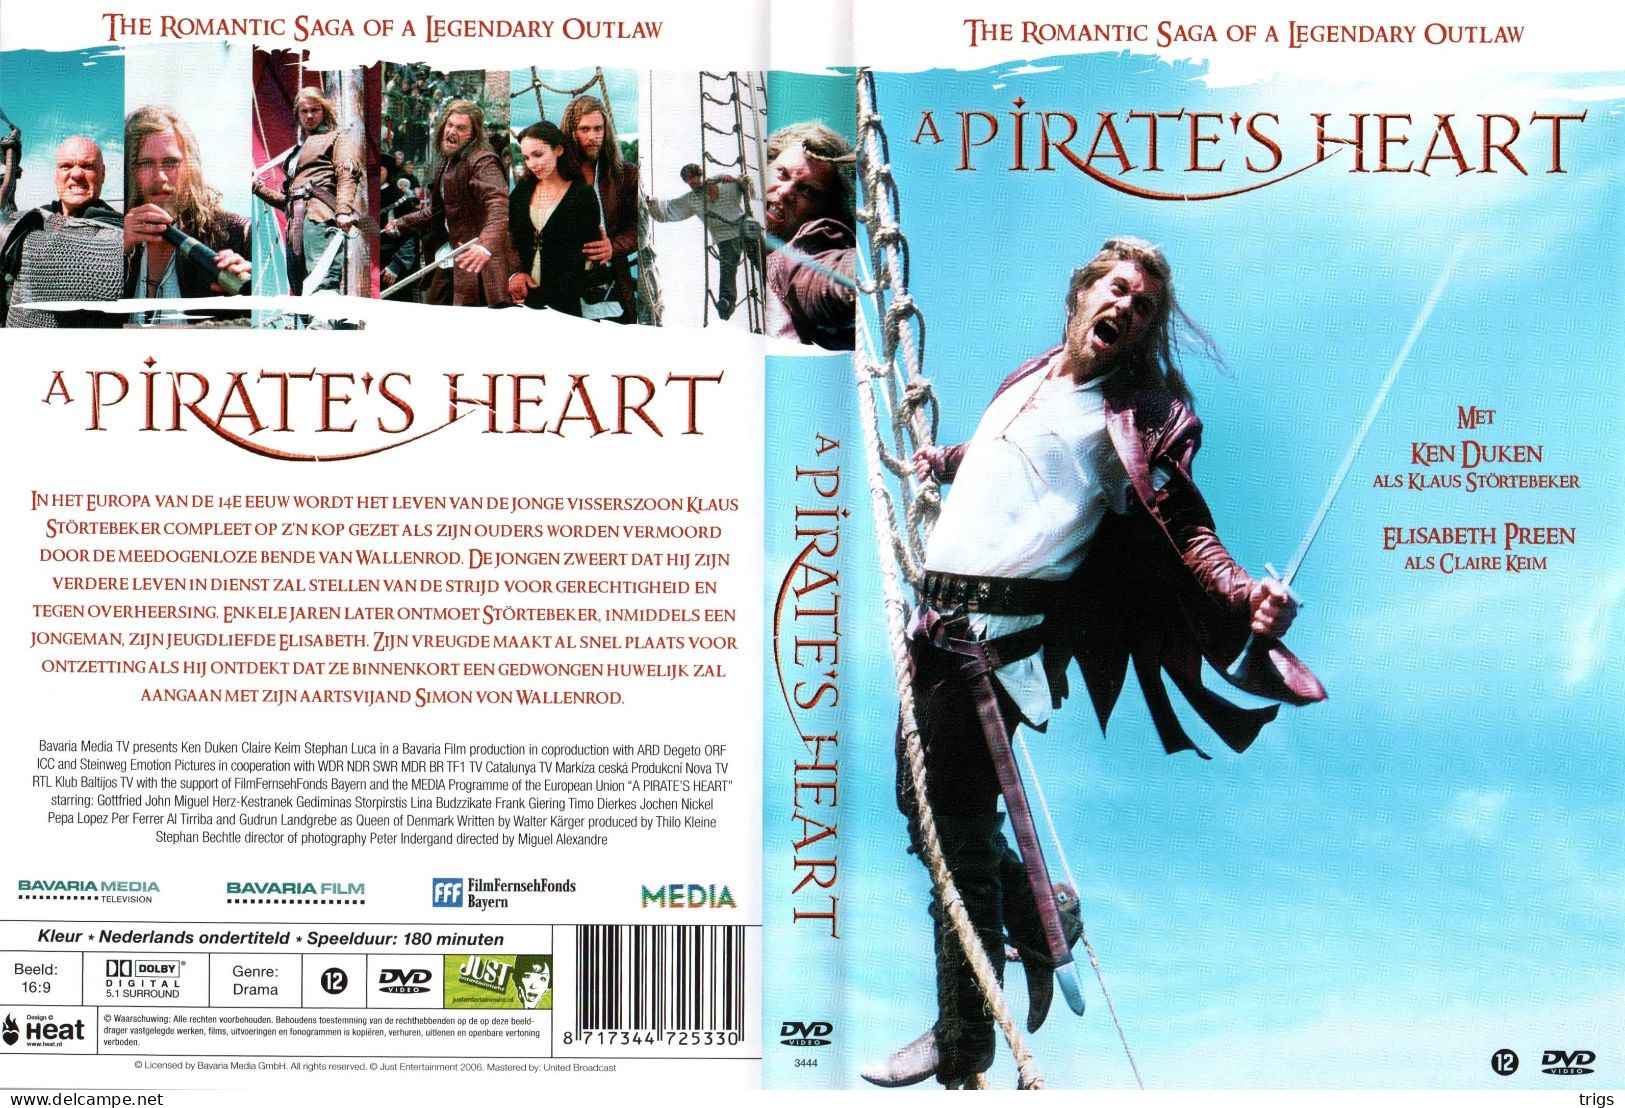 DVD - A Pirate's Heart - Action, Aventure